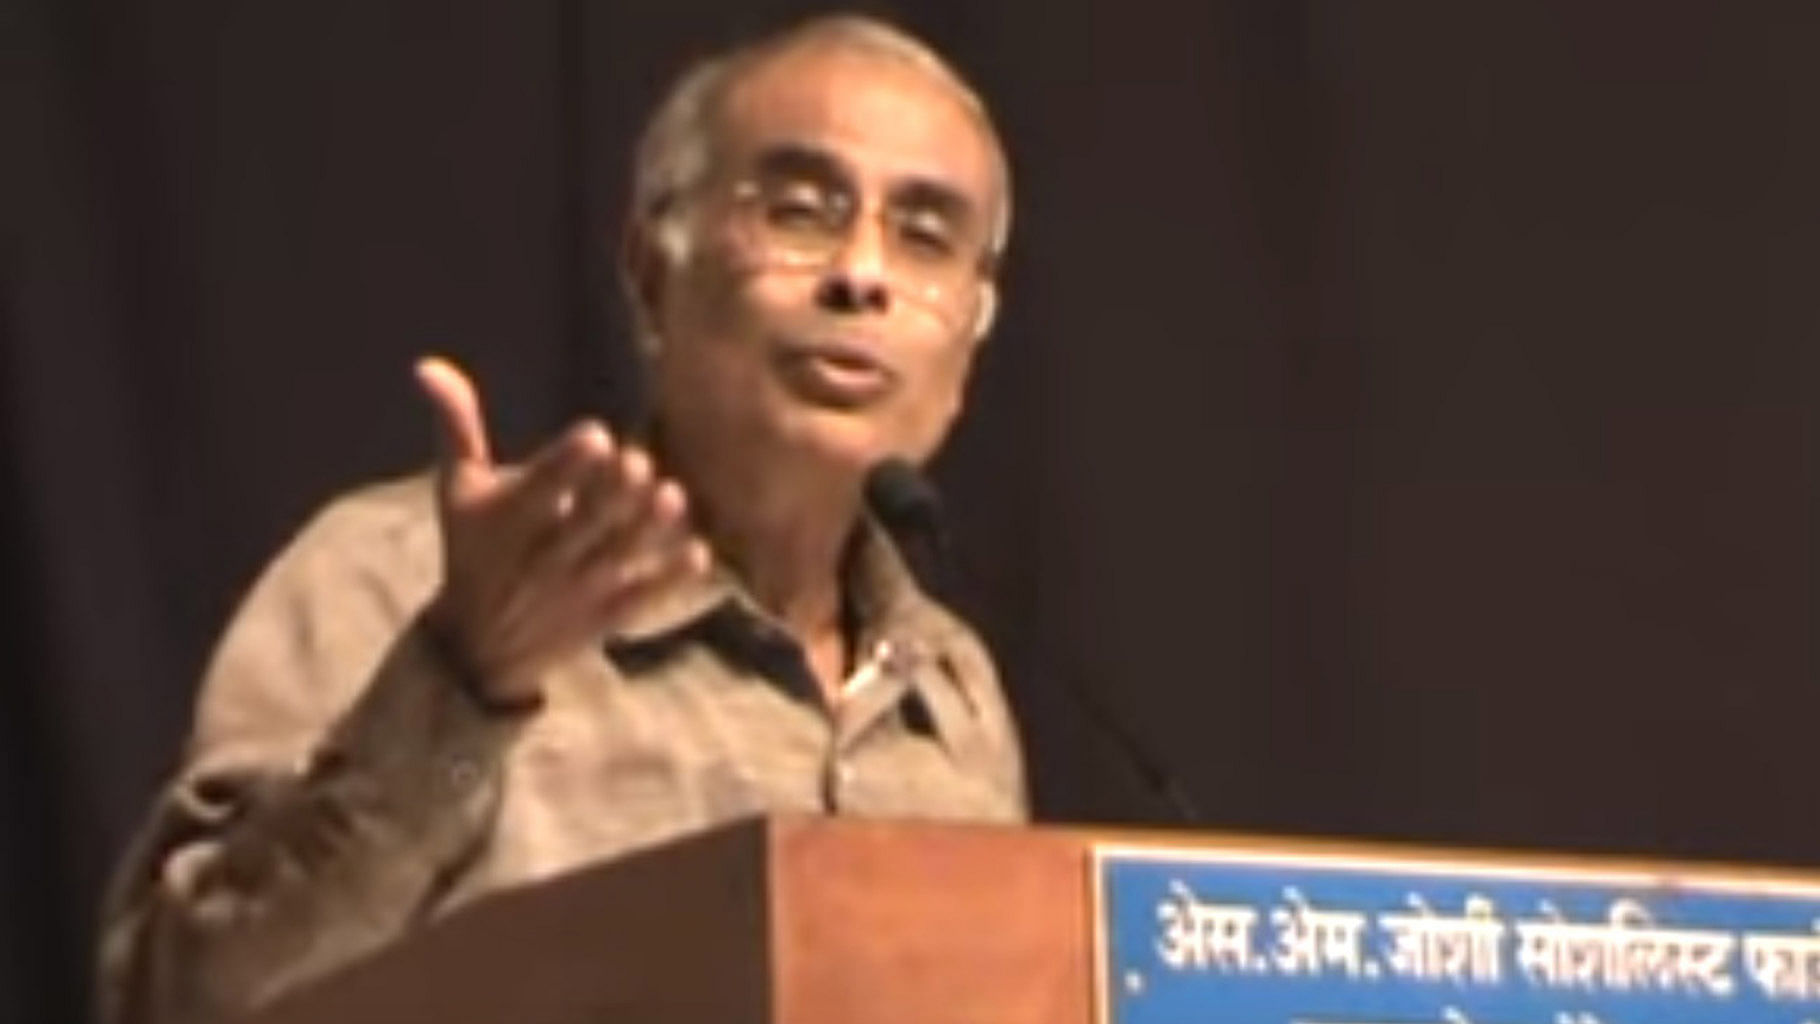  Dr Narendra Dabholkar was shot dead on 20 August 2013 in Pune. (Photo Courtesy: Youtube Screengrab)